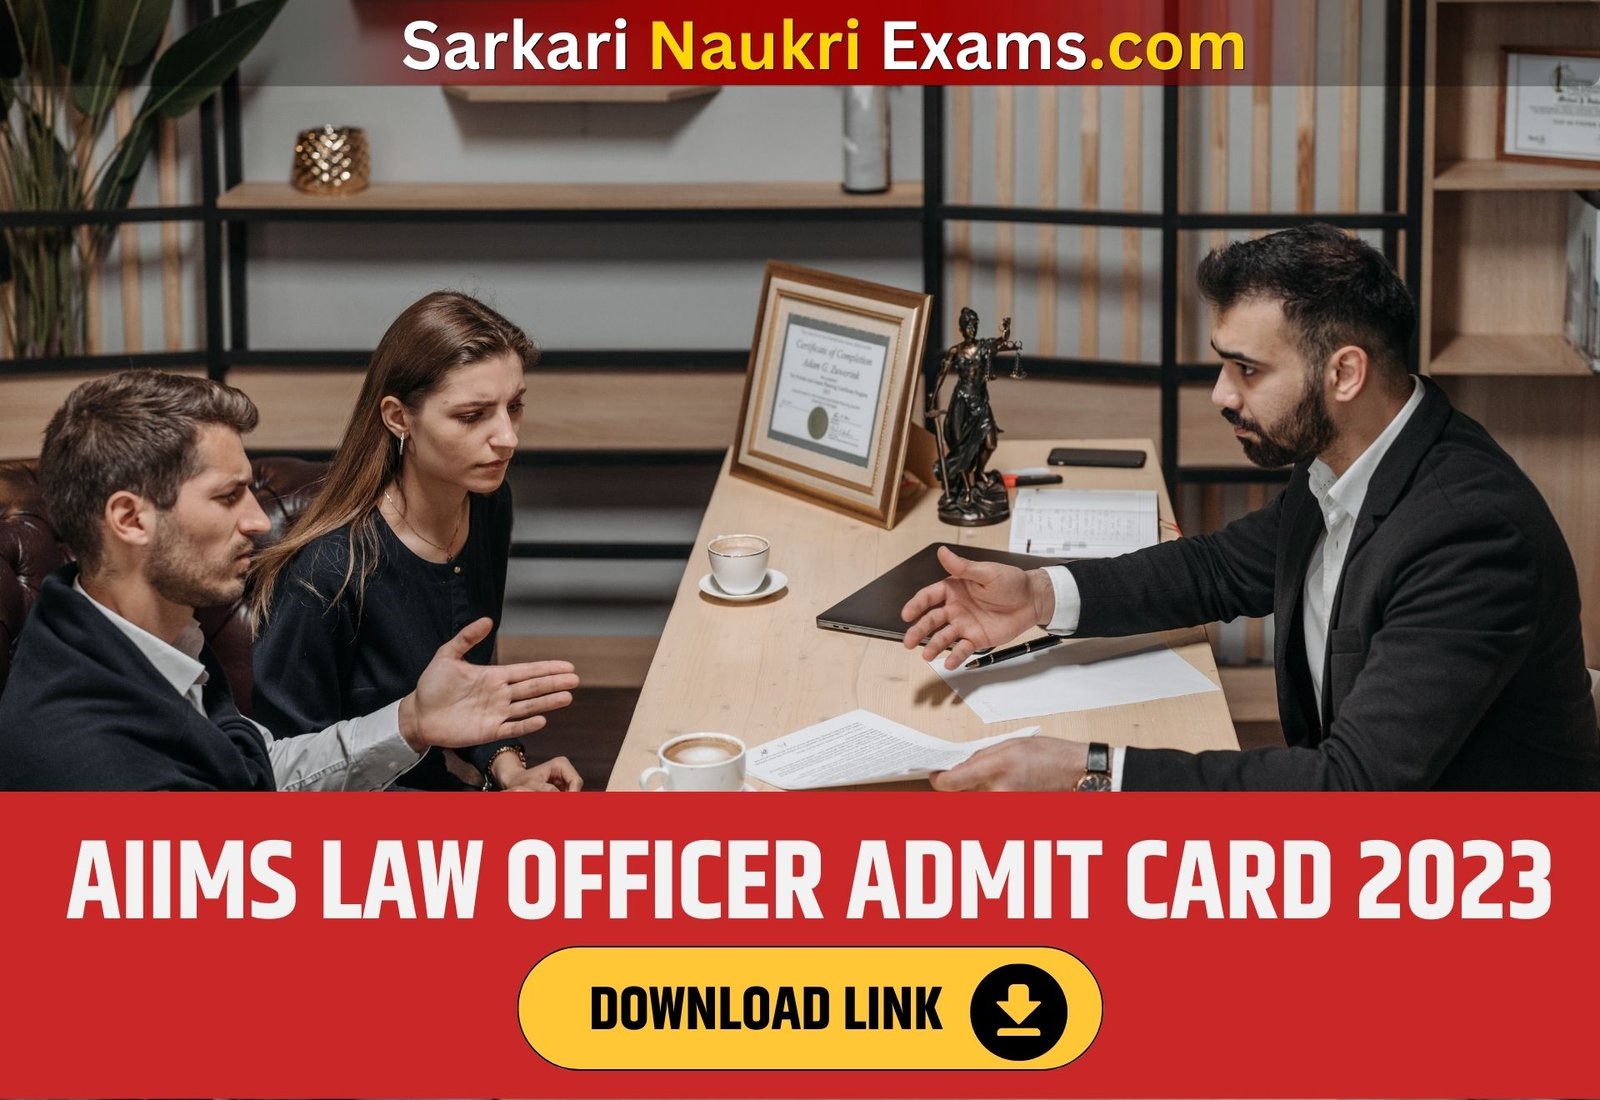 AIIMS Law Officer Admit Card 2023 | Download Link, [Exam Date]